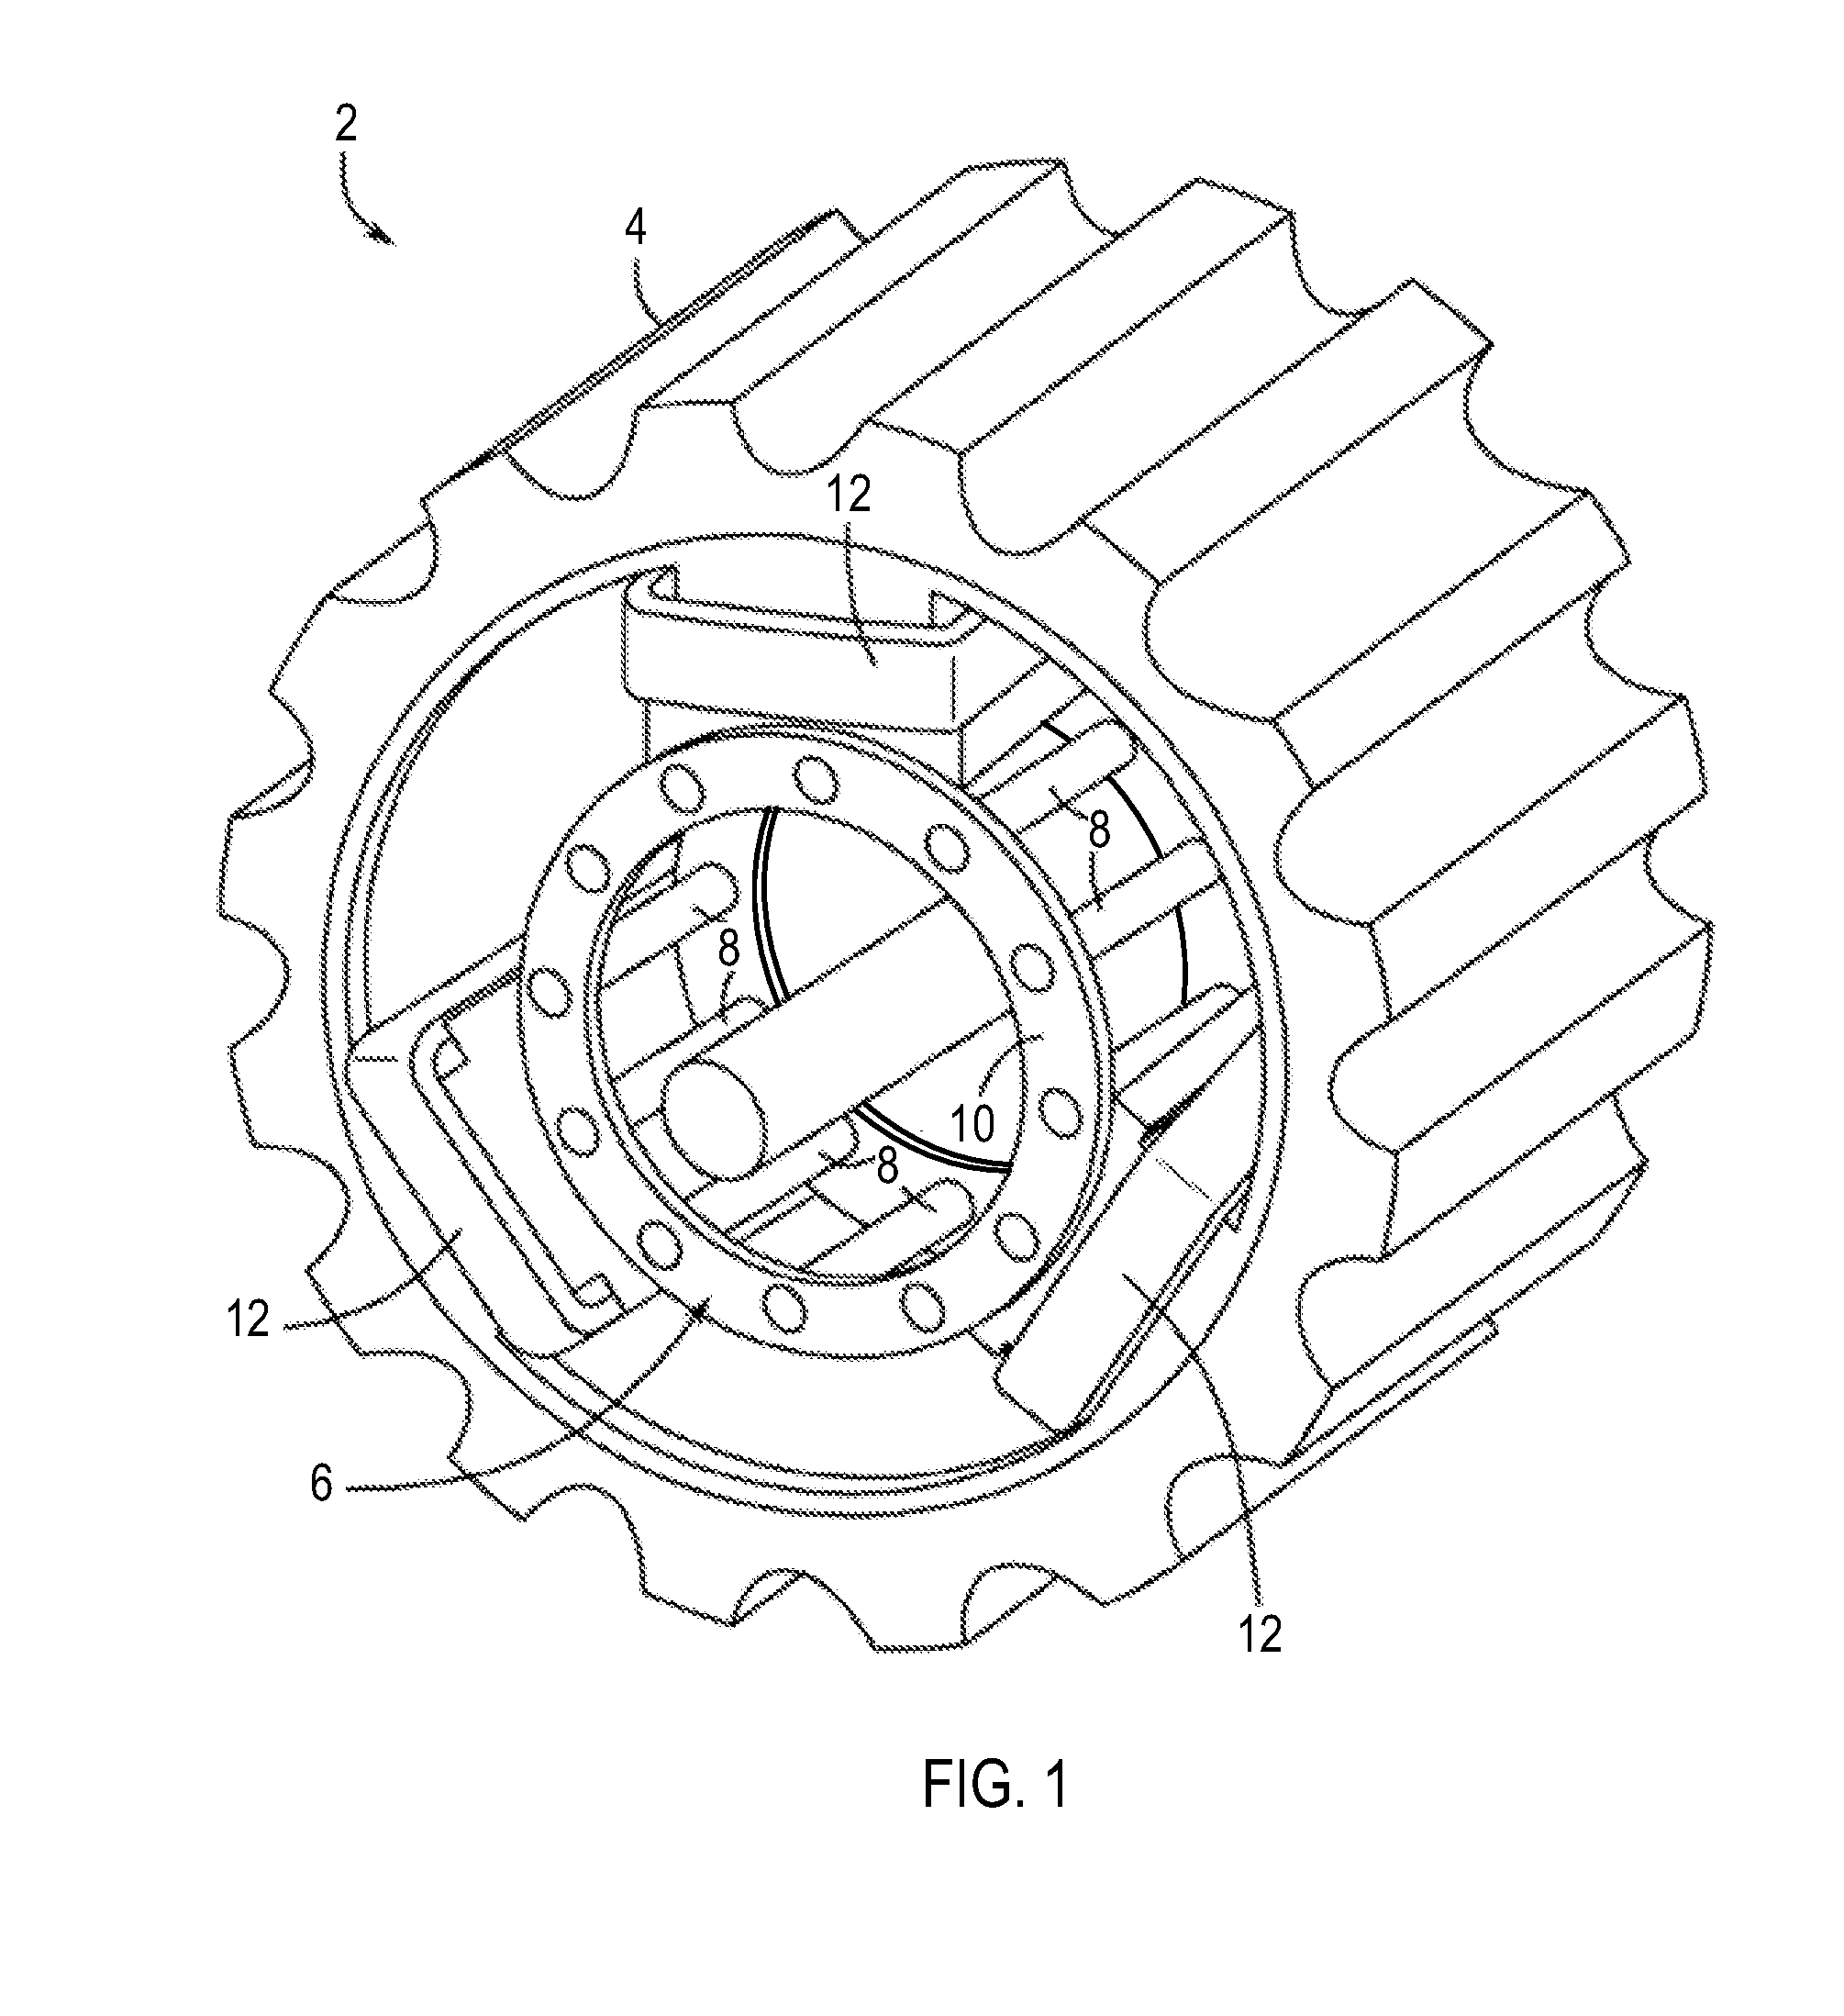 System and method for detecting fault in an ac machine